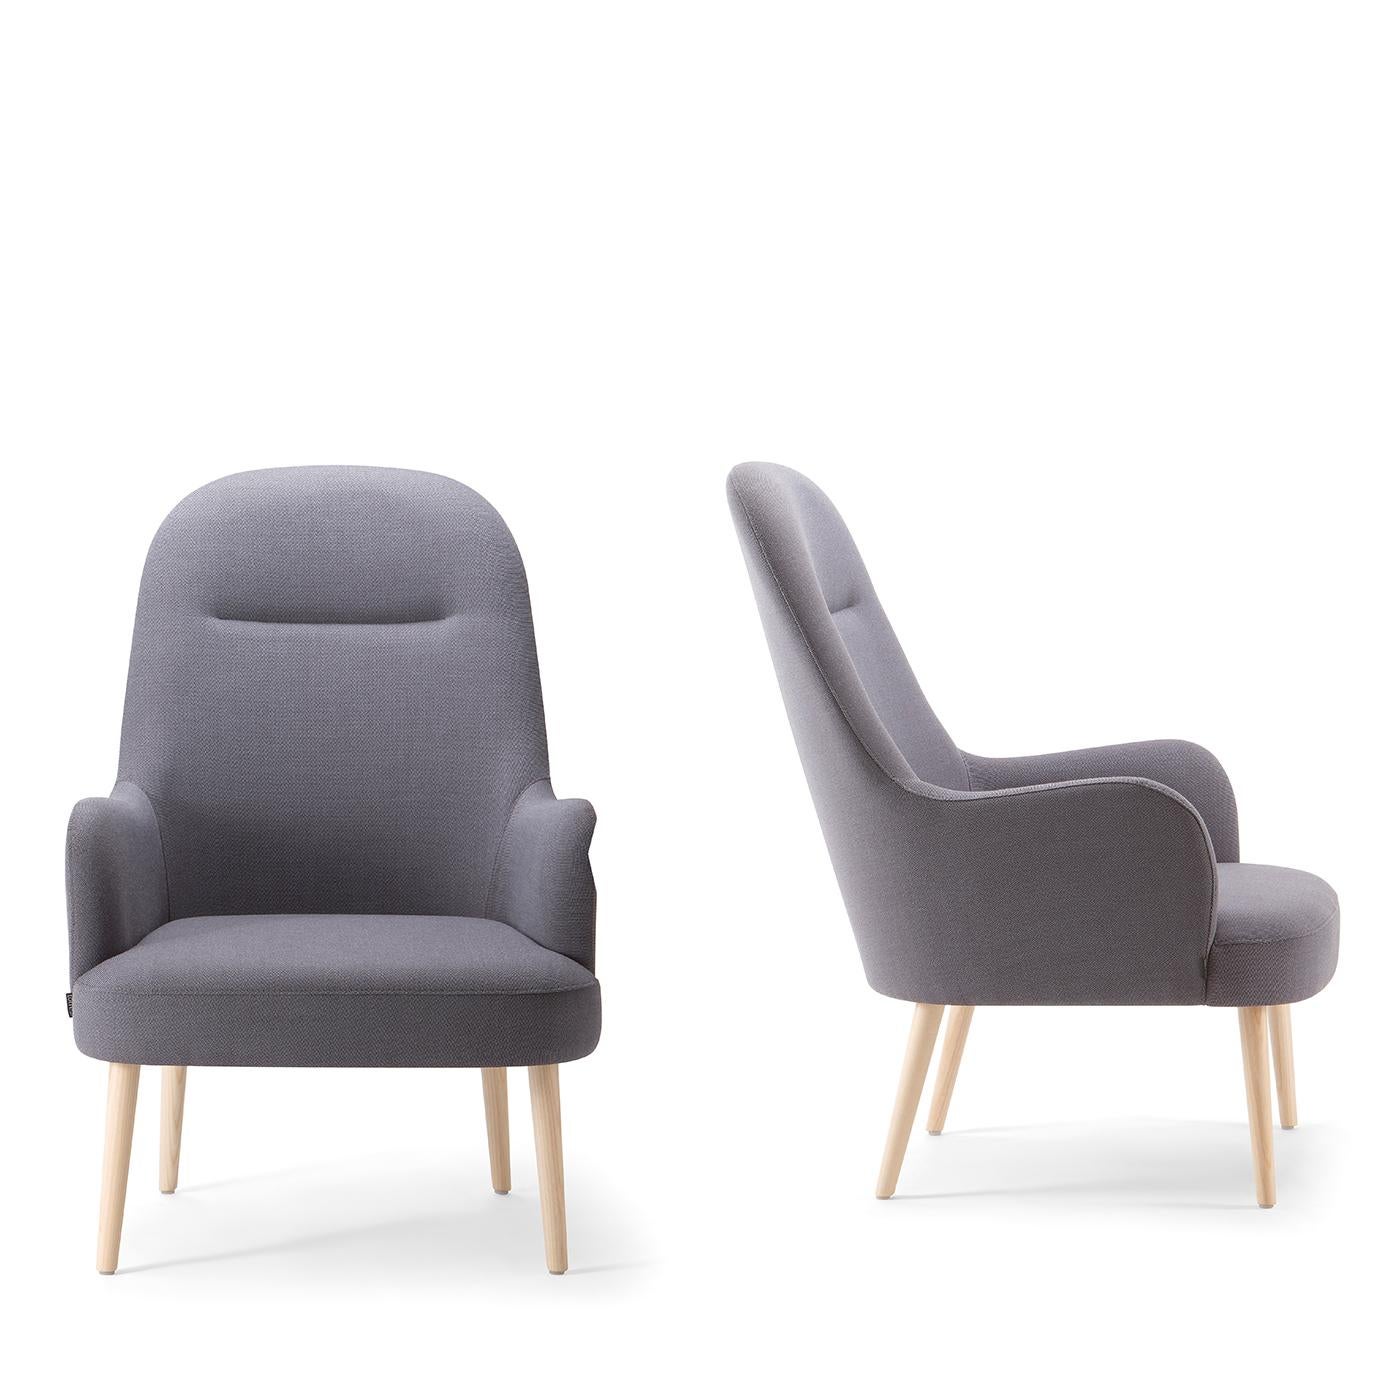 A refined addition to any living room or office decor, this splendid chair is characterized by classic lines and features a polyurethane foam-padded frame supported by natural ash wood legs. A carefully profiled high backrest towers over a large